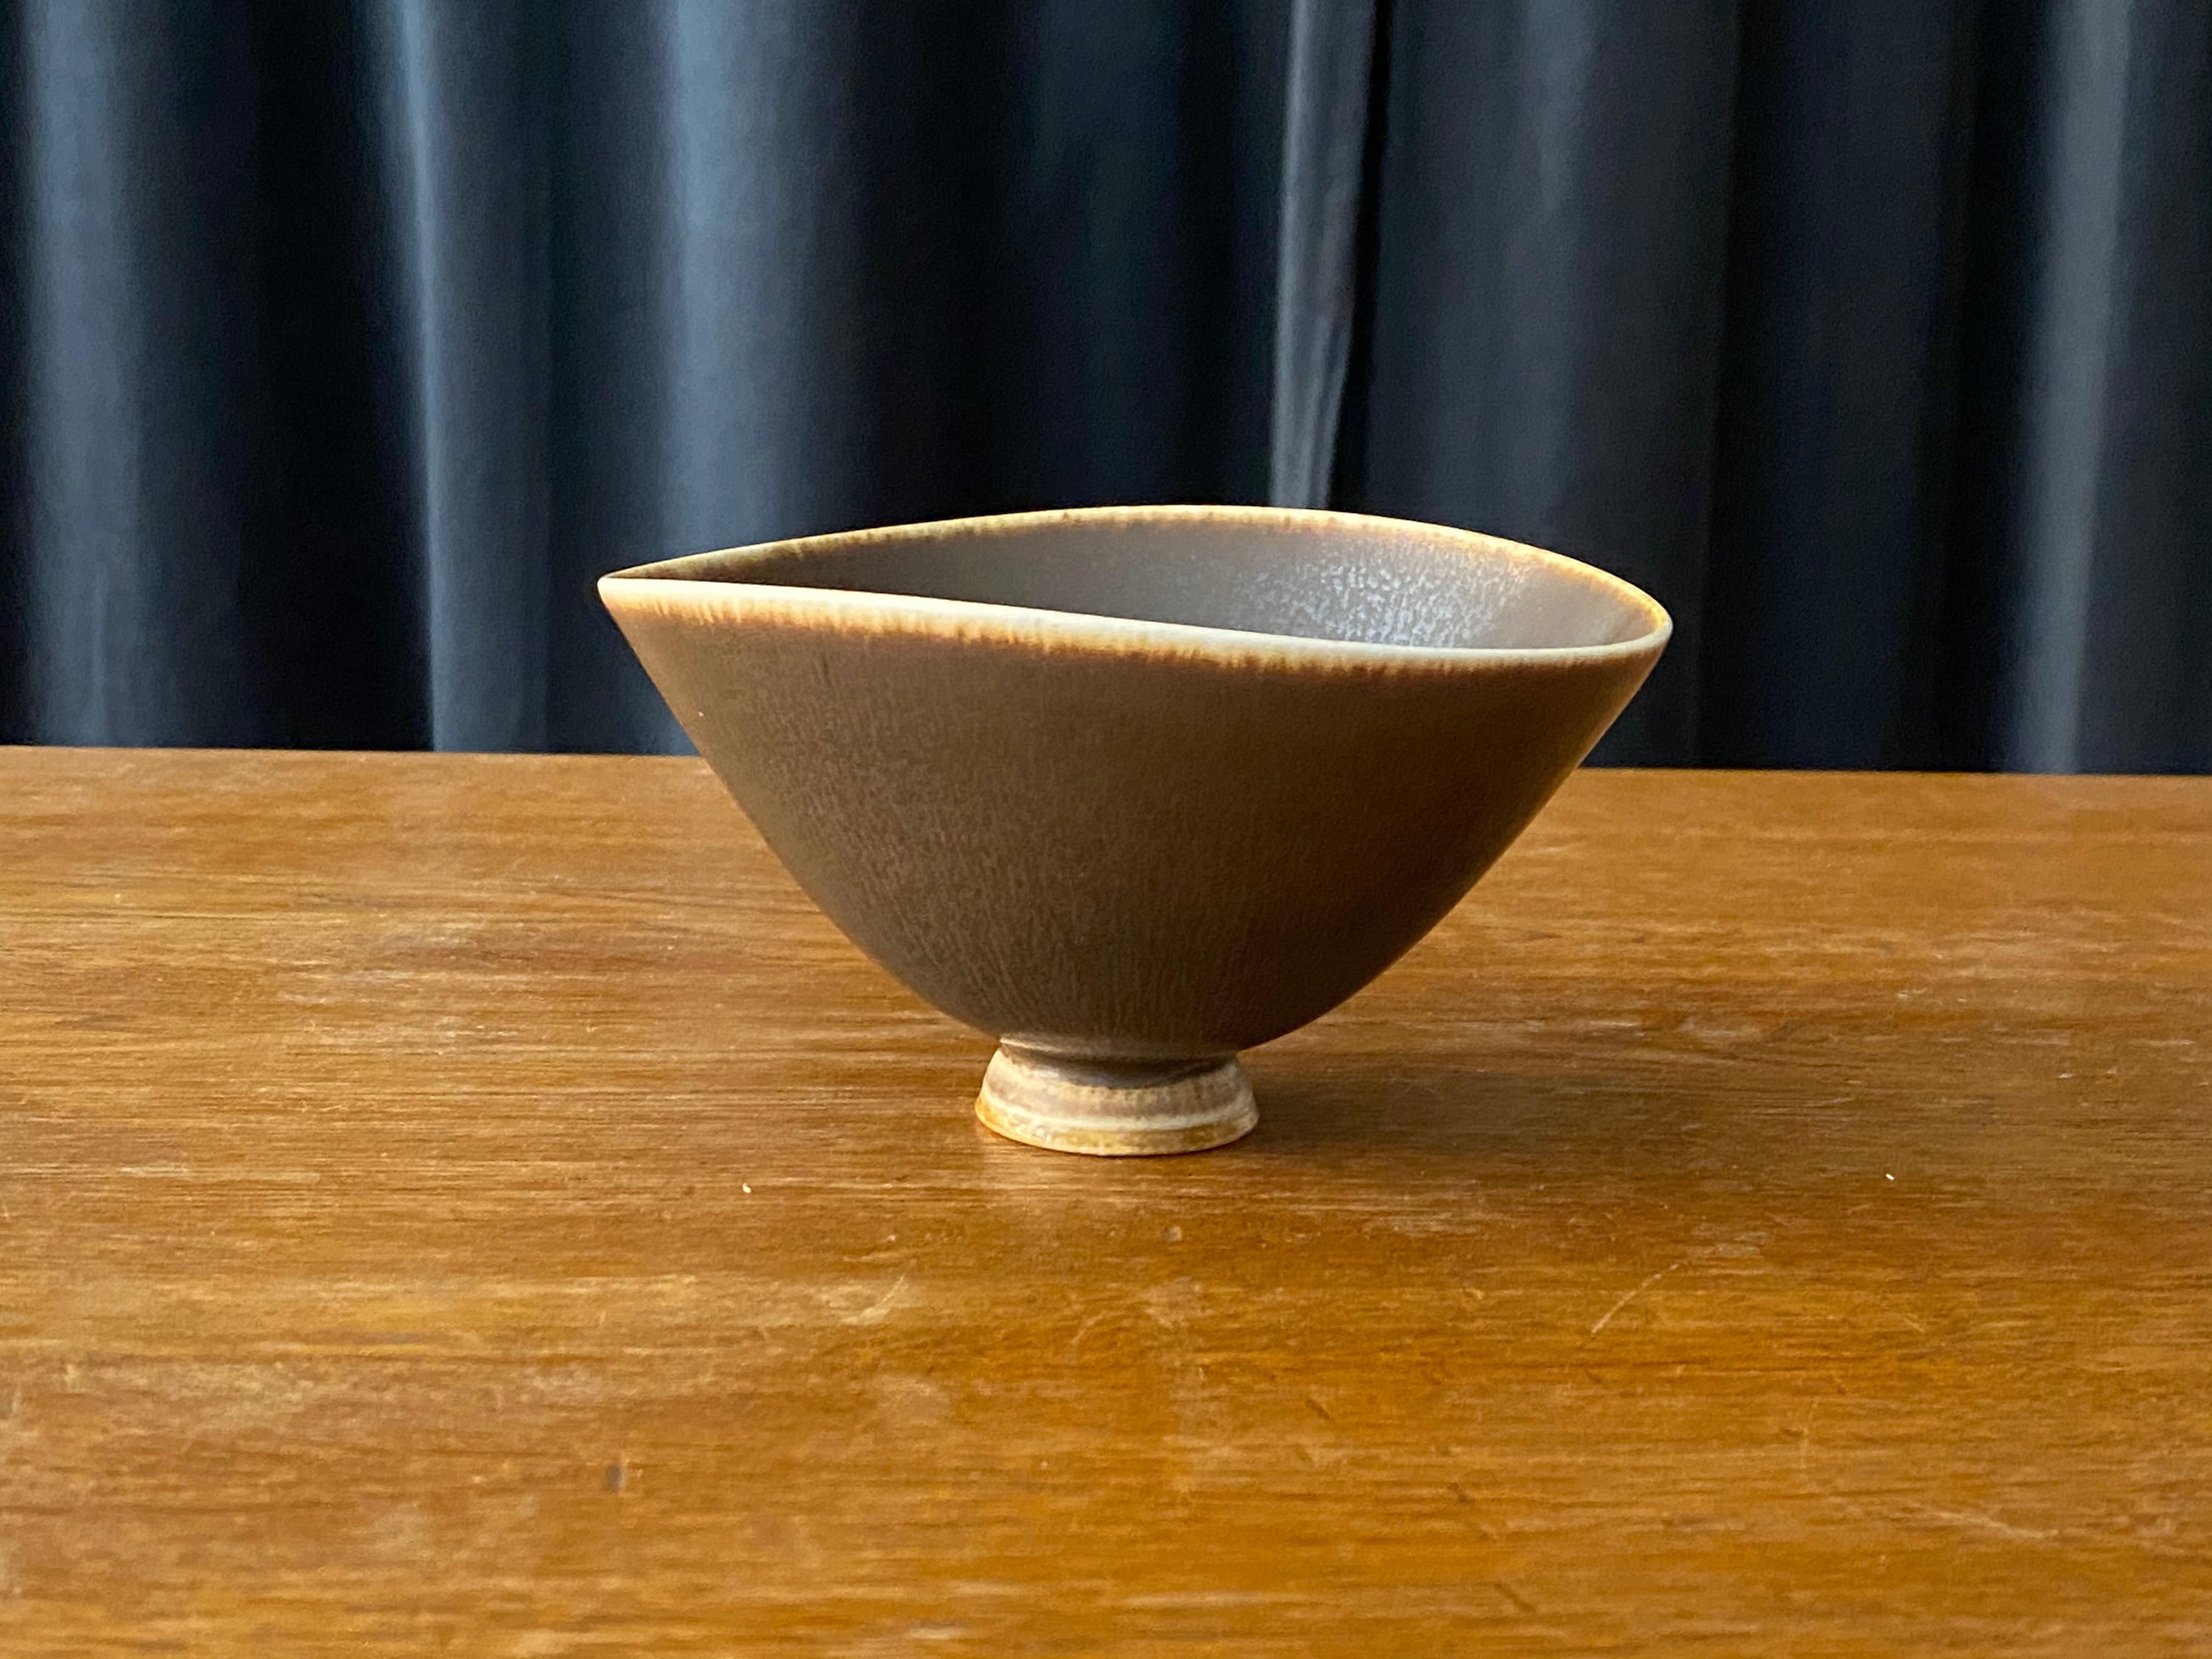 An organicly shaped ceramic stoneware bowl by Berndt Friberg for the iconic Swedish pottery firm Gustavsberg. Signed and dated 1976.

Other ceramicists of the period include Berndt Friberg, Axel Salto, and Wilhelm Kåge.